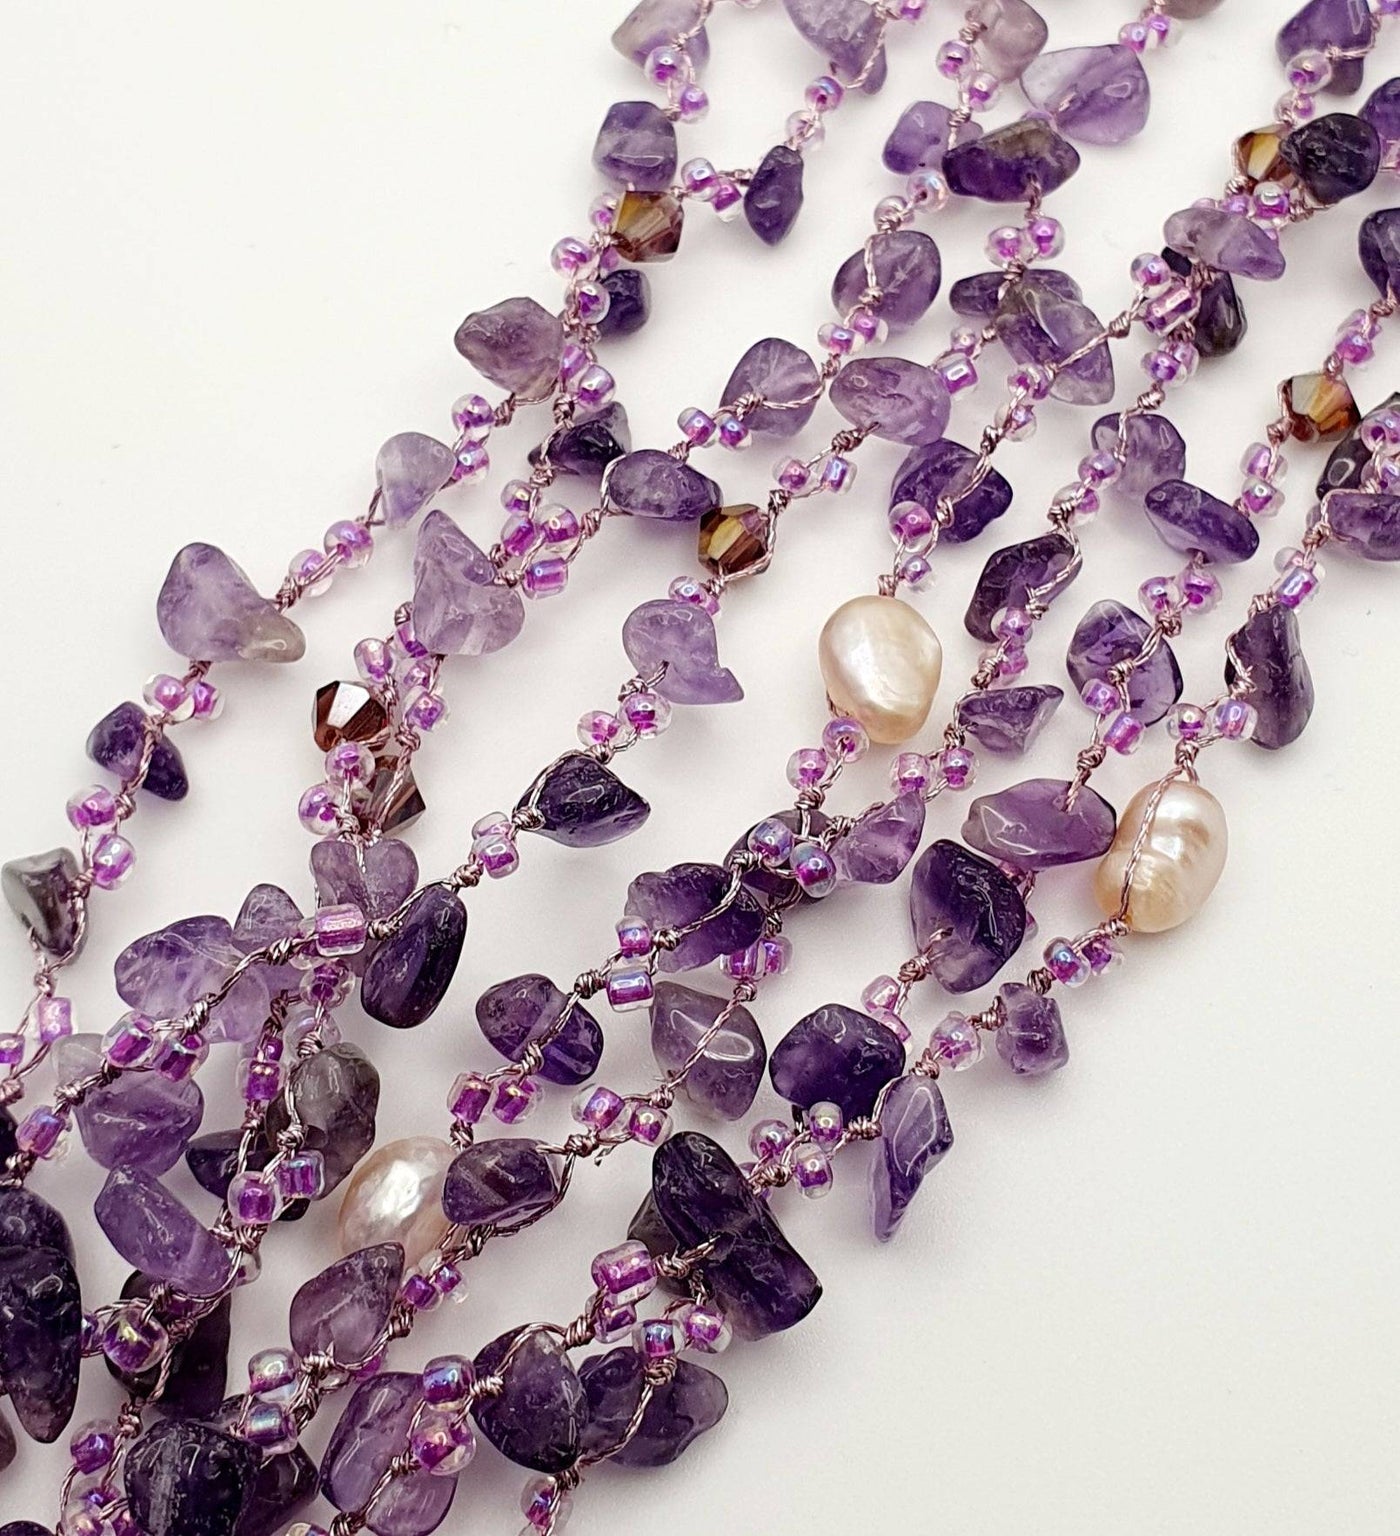 Japanese Silk Combination of Amethyst, Crystals & Freshwater Pearls Strand 150cm